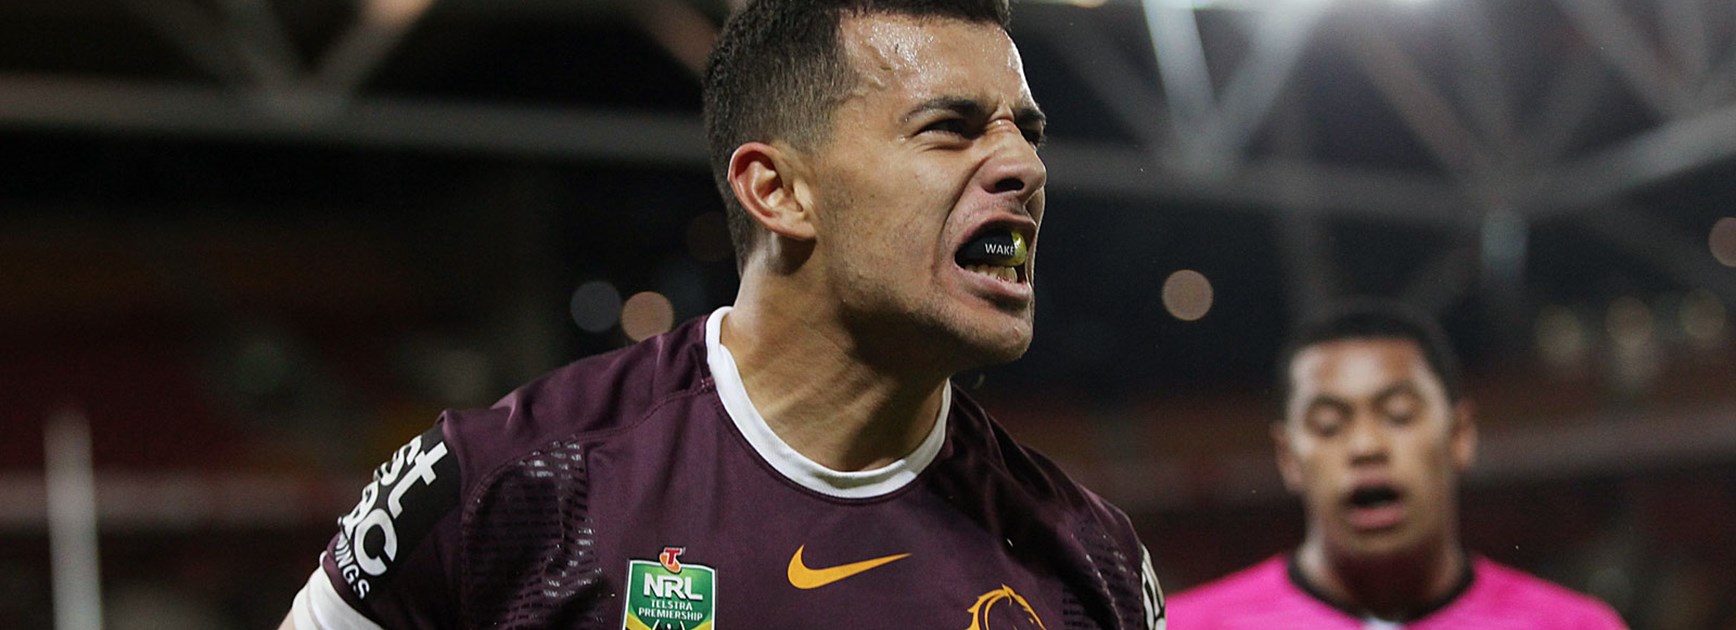 Jordan Kahu celebrates his try in the Broncos' Round 9 meeting with the Panthers.